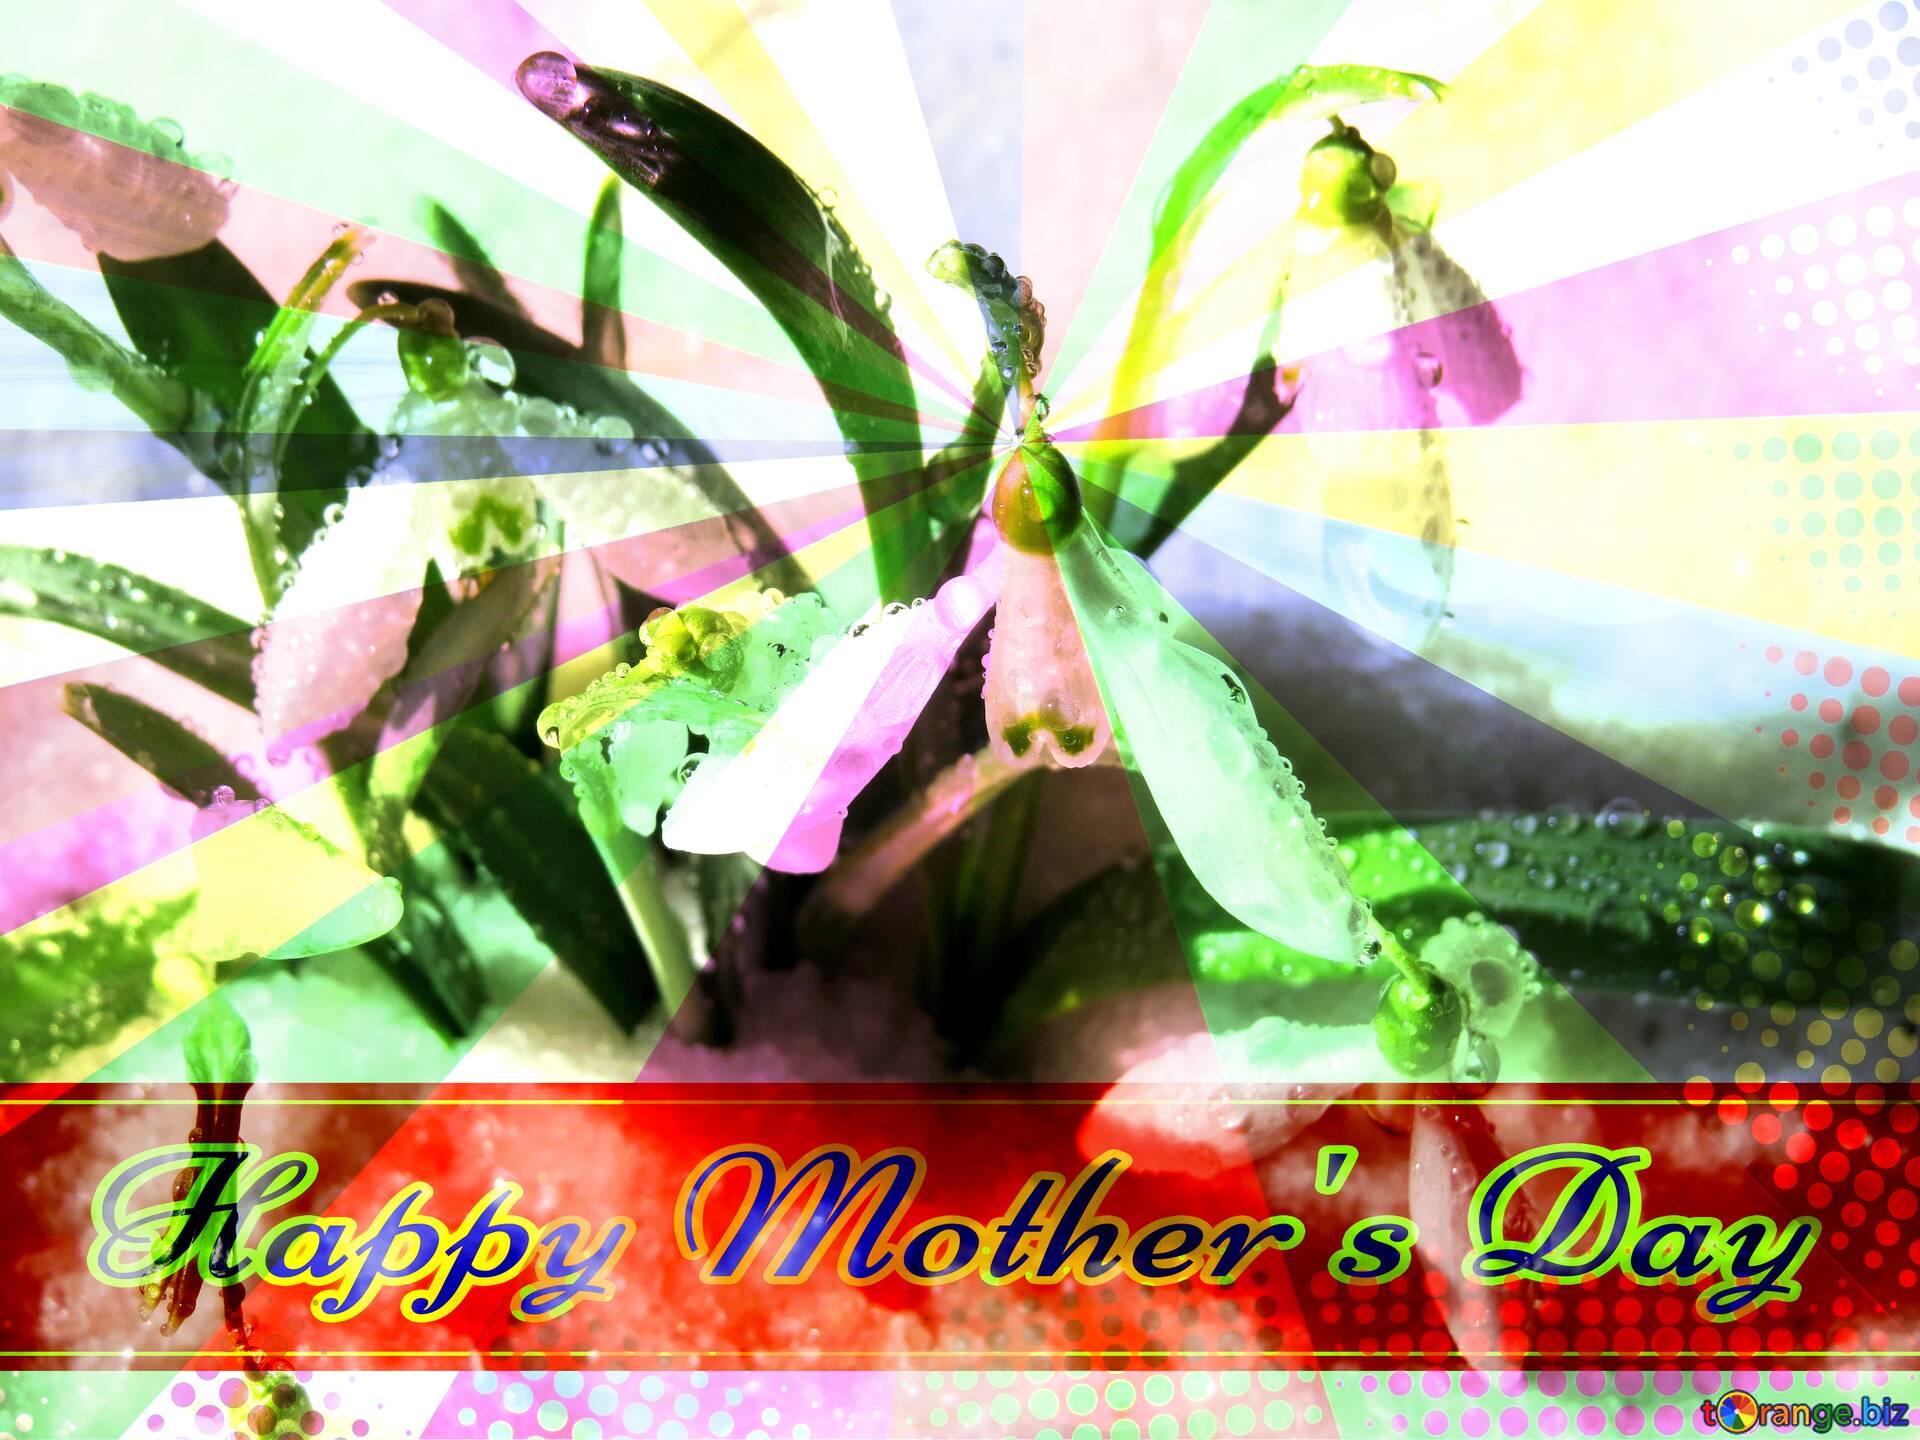 Download Free Picture Early Spring Wallpaper Retro Style Card For Happy Mother's Day With Colors Rays On CC BY License Free Image Stock TOrange.biz Fx №171563